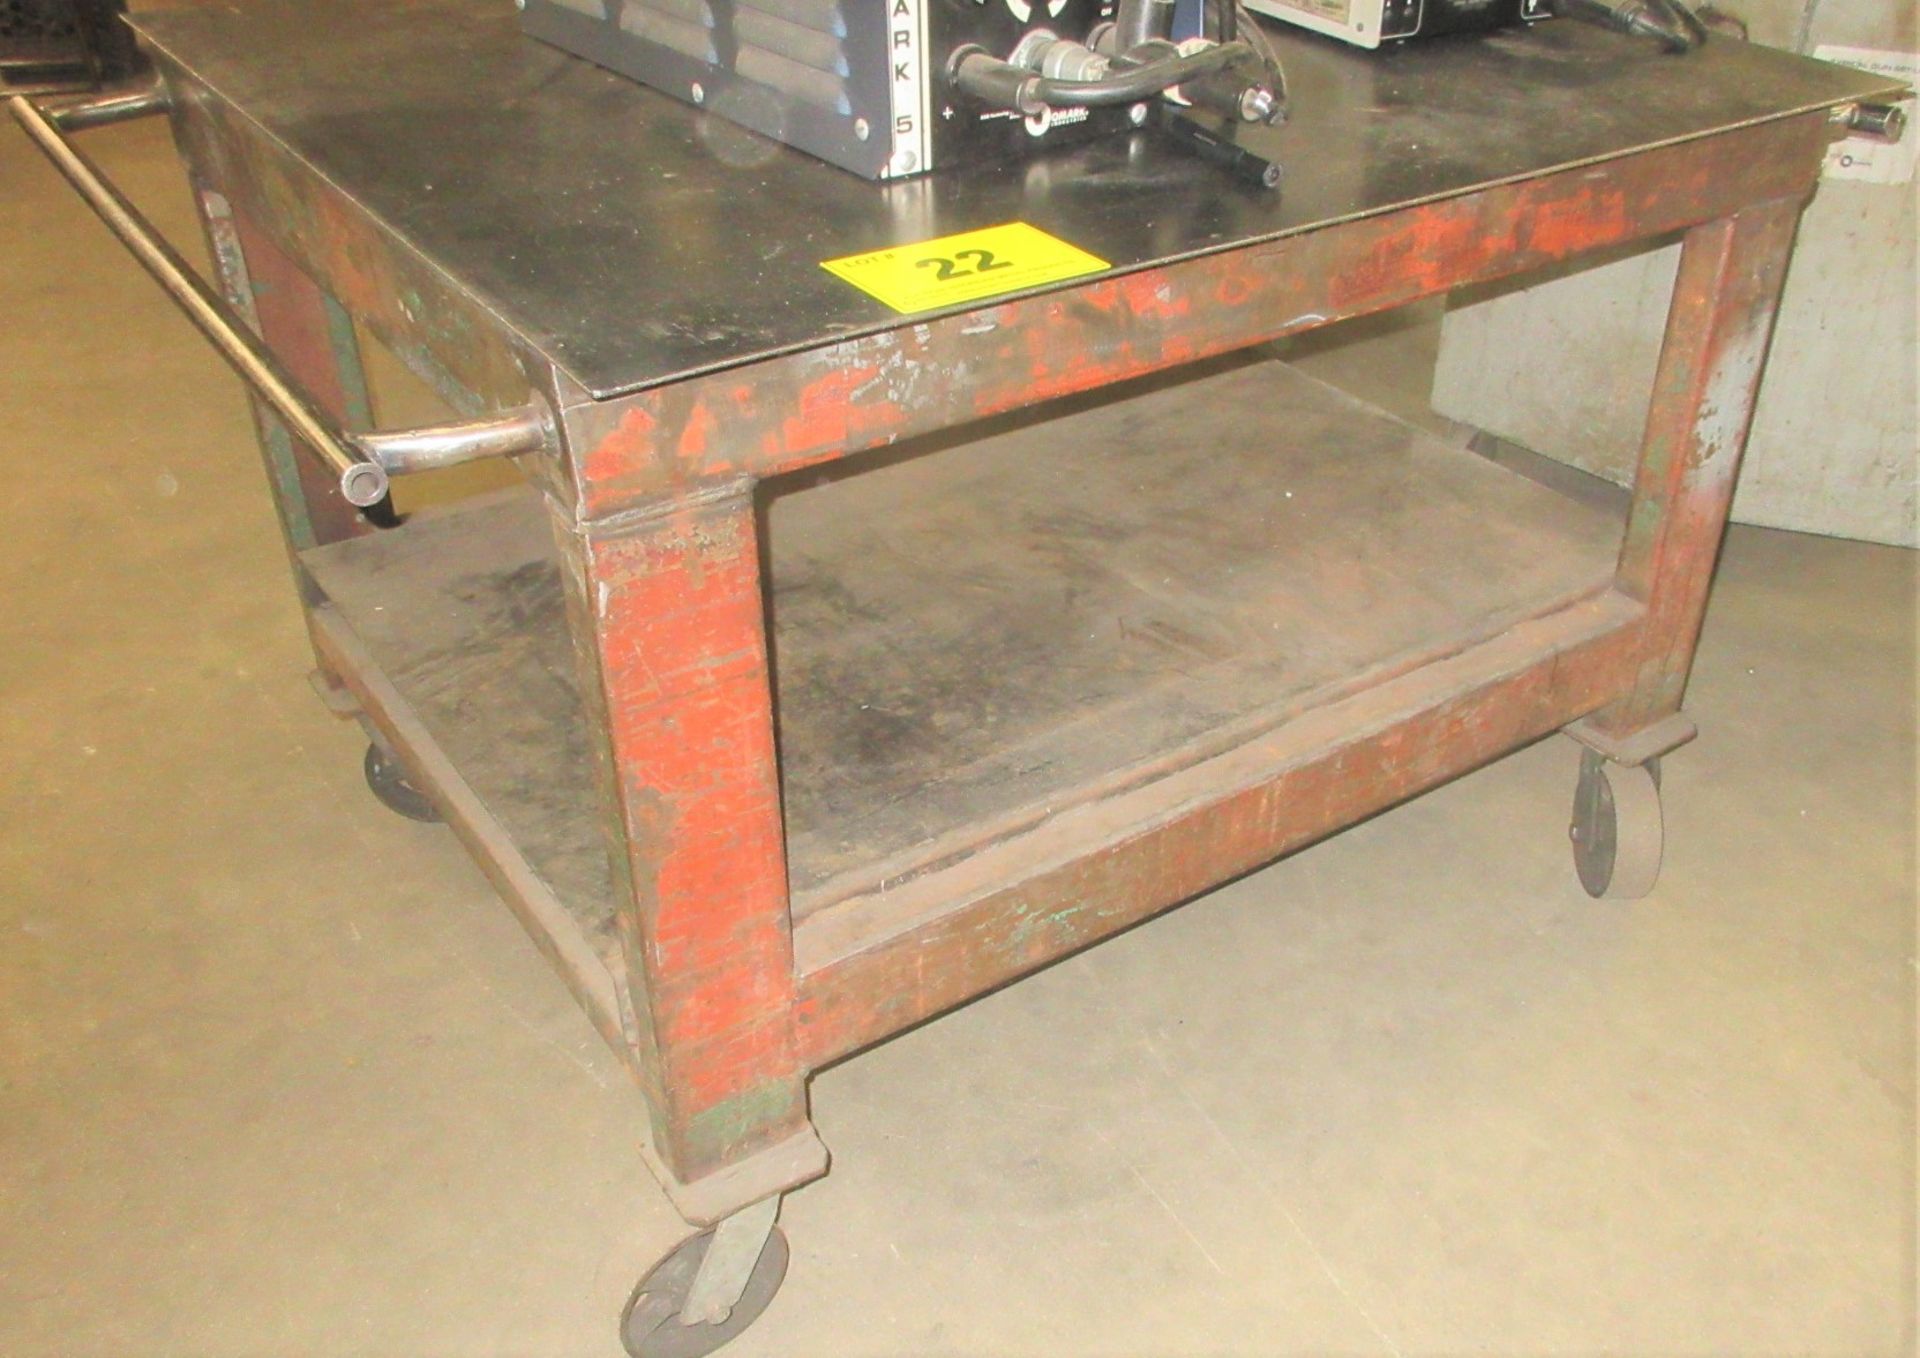 APPROX. 4'L X 42"W PORTABLE WELDING TABLE, 2-LEVELS (NO CONTENTS)